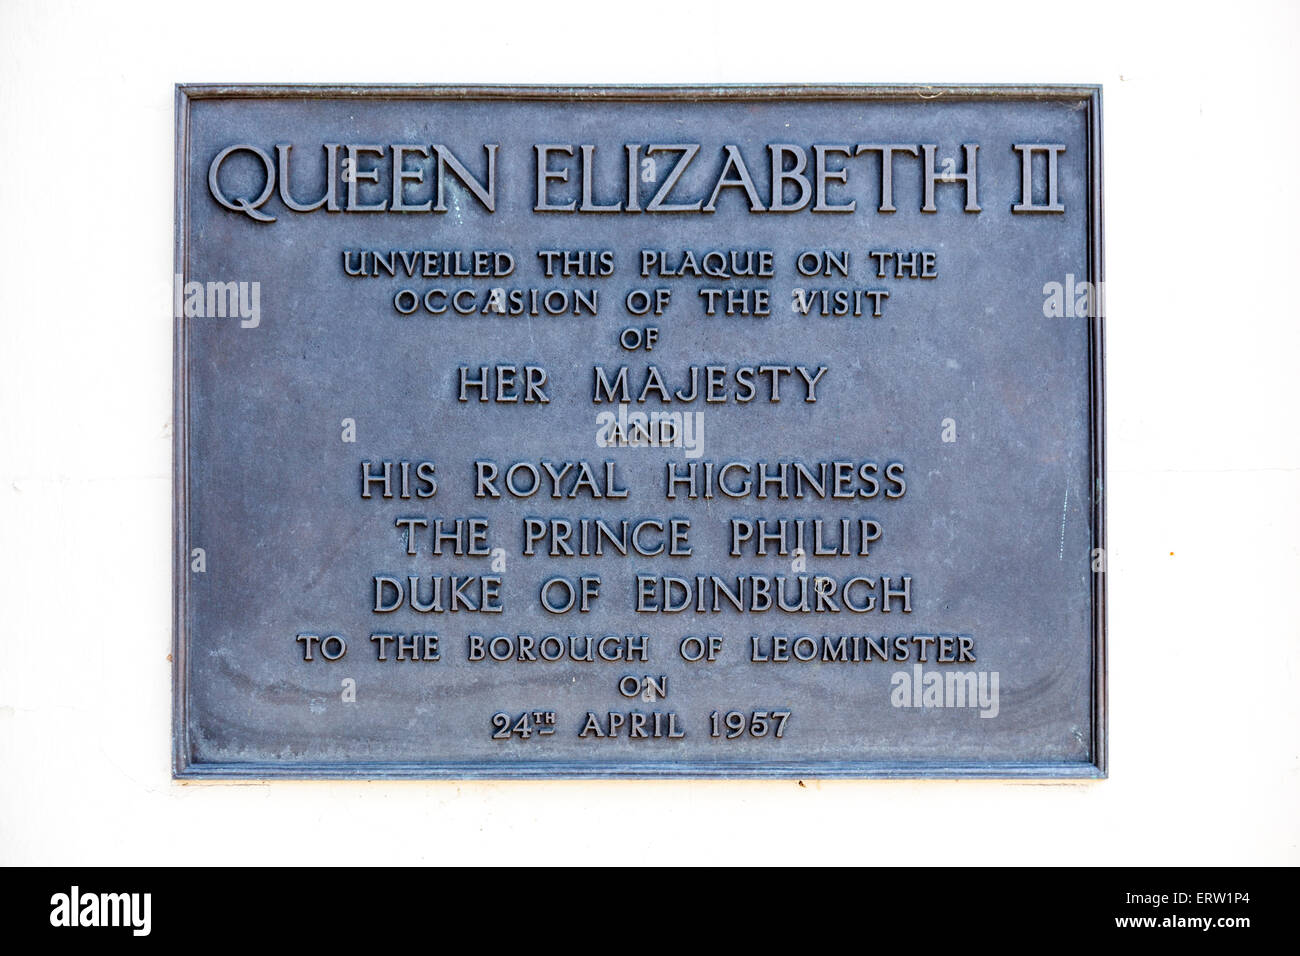 Plaque commemorating the visit of The Queen, Elizabeth II, to Leominster, located at Grange Court, Leominster, Herefordshire Stock Photo